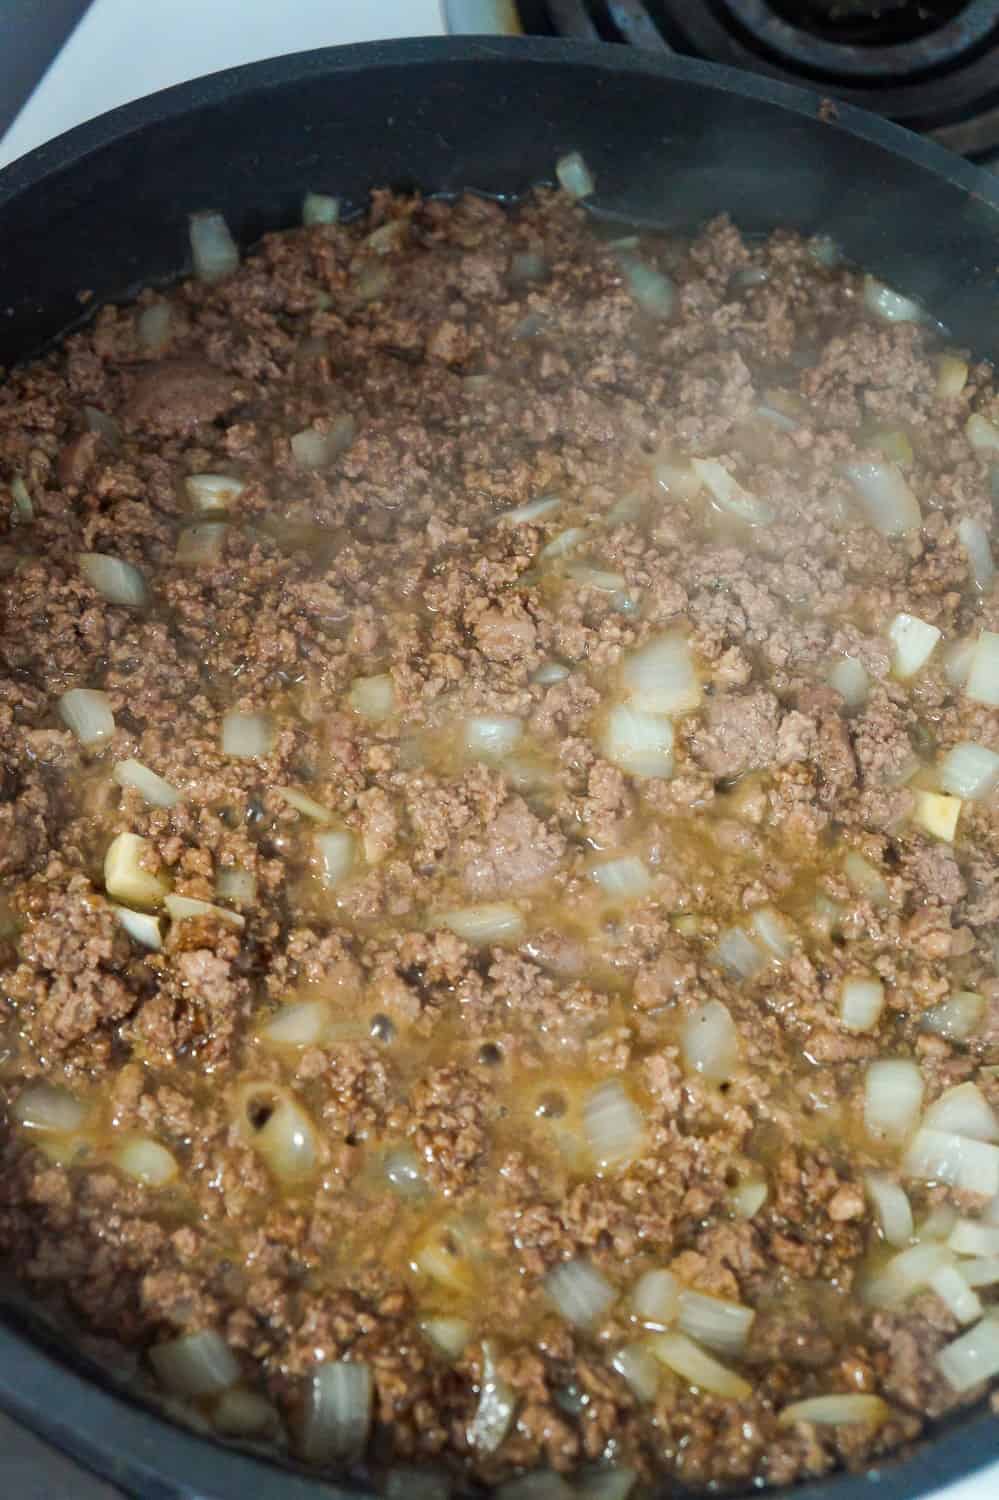 cooked ground beef and onions in a frying pan with gravy